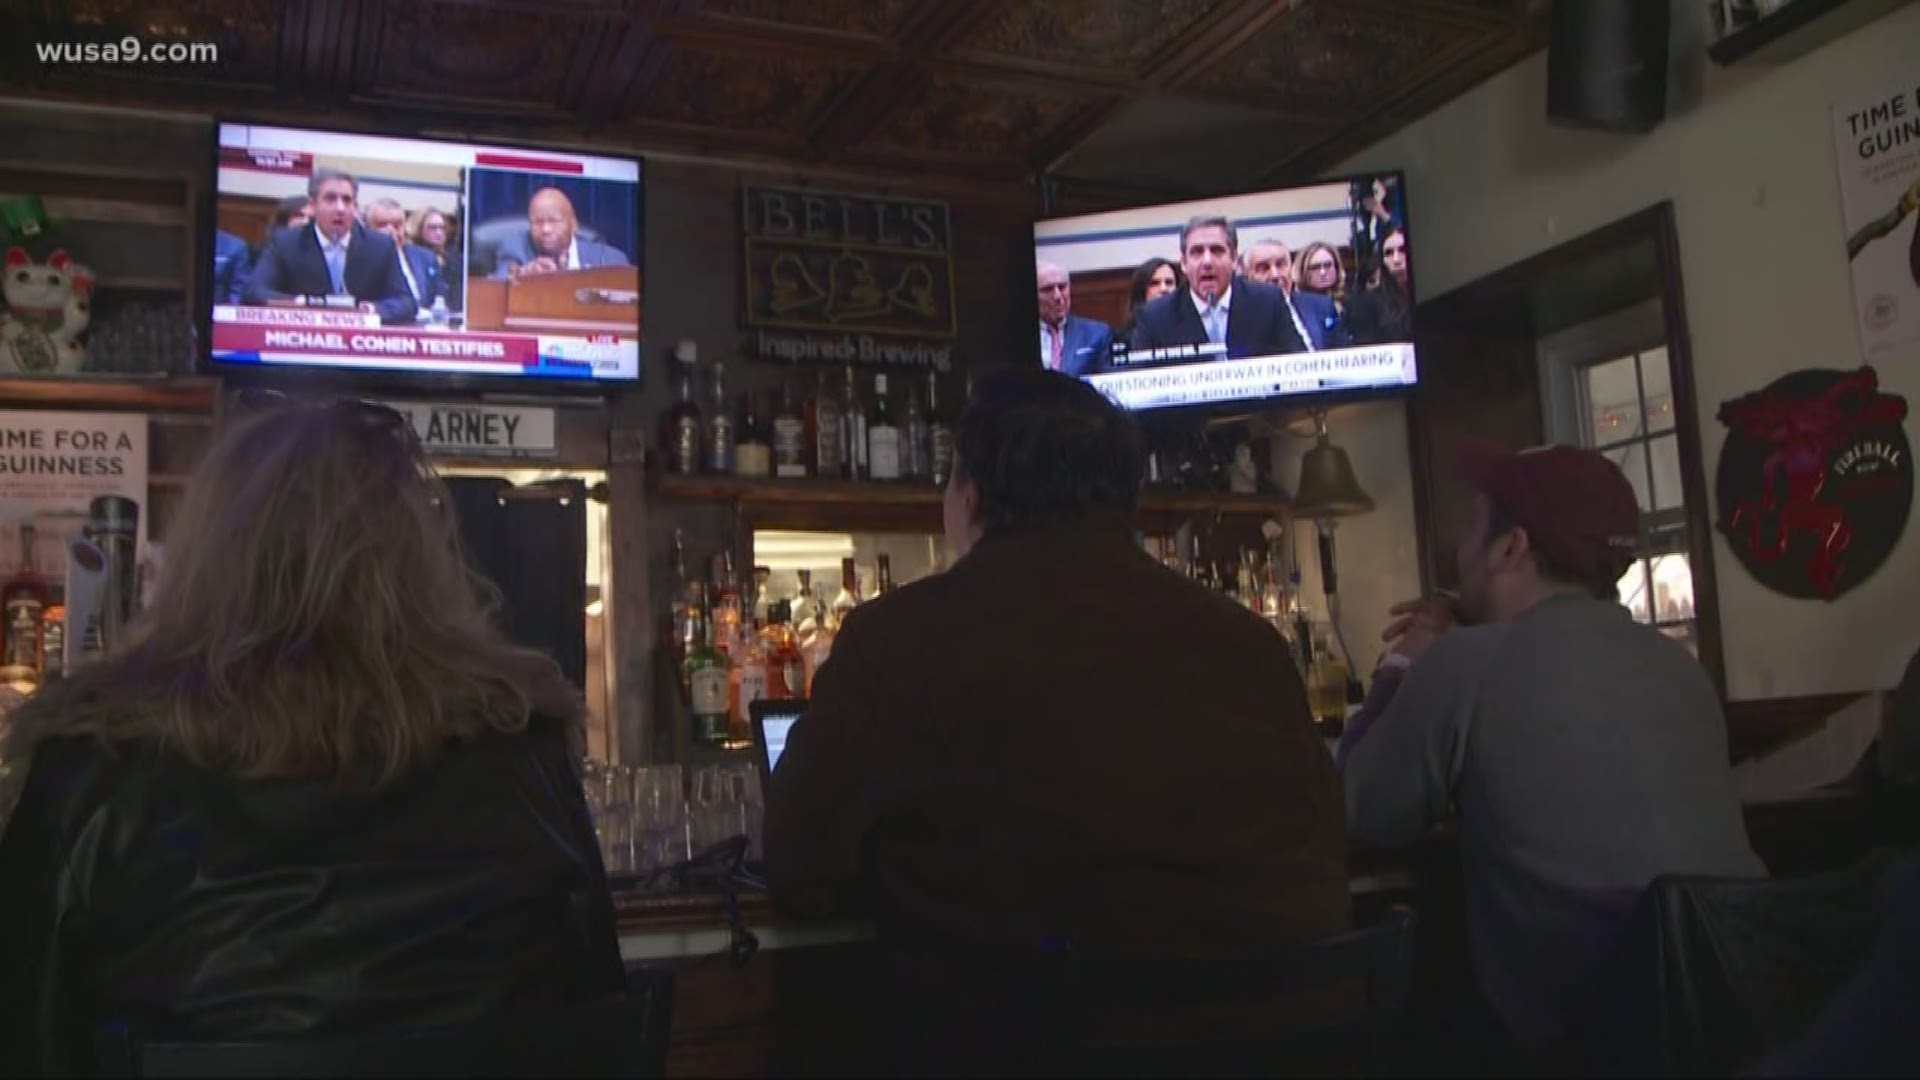 A Rhode Islander was surprised watching her first Congressional hearing in a D.C. bar.